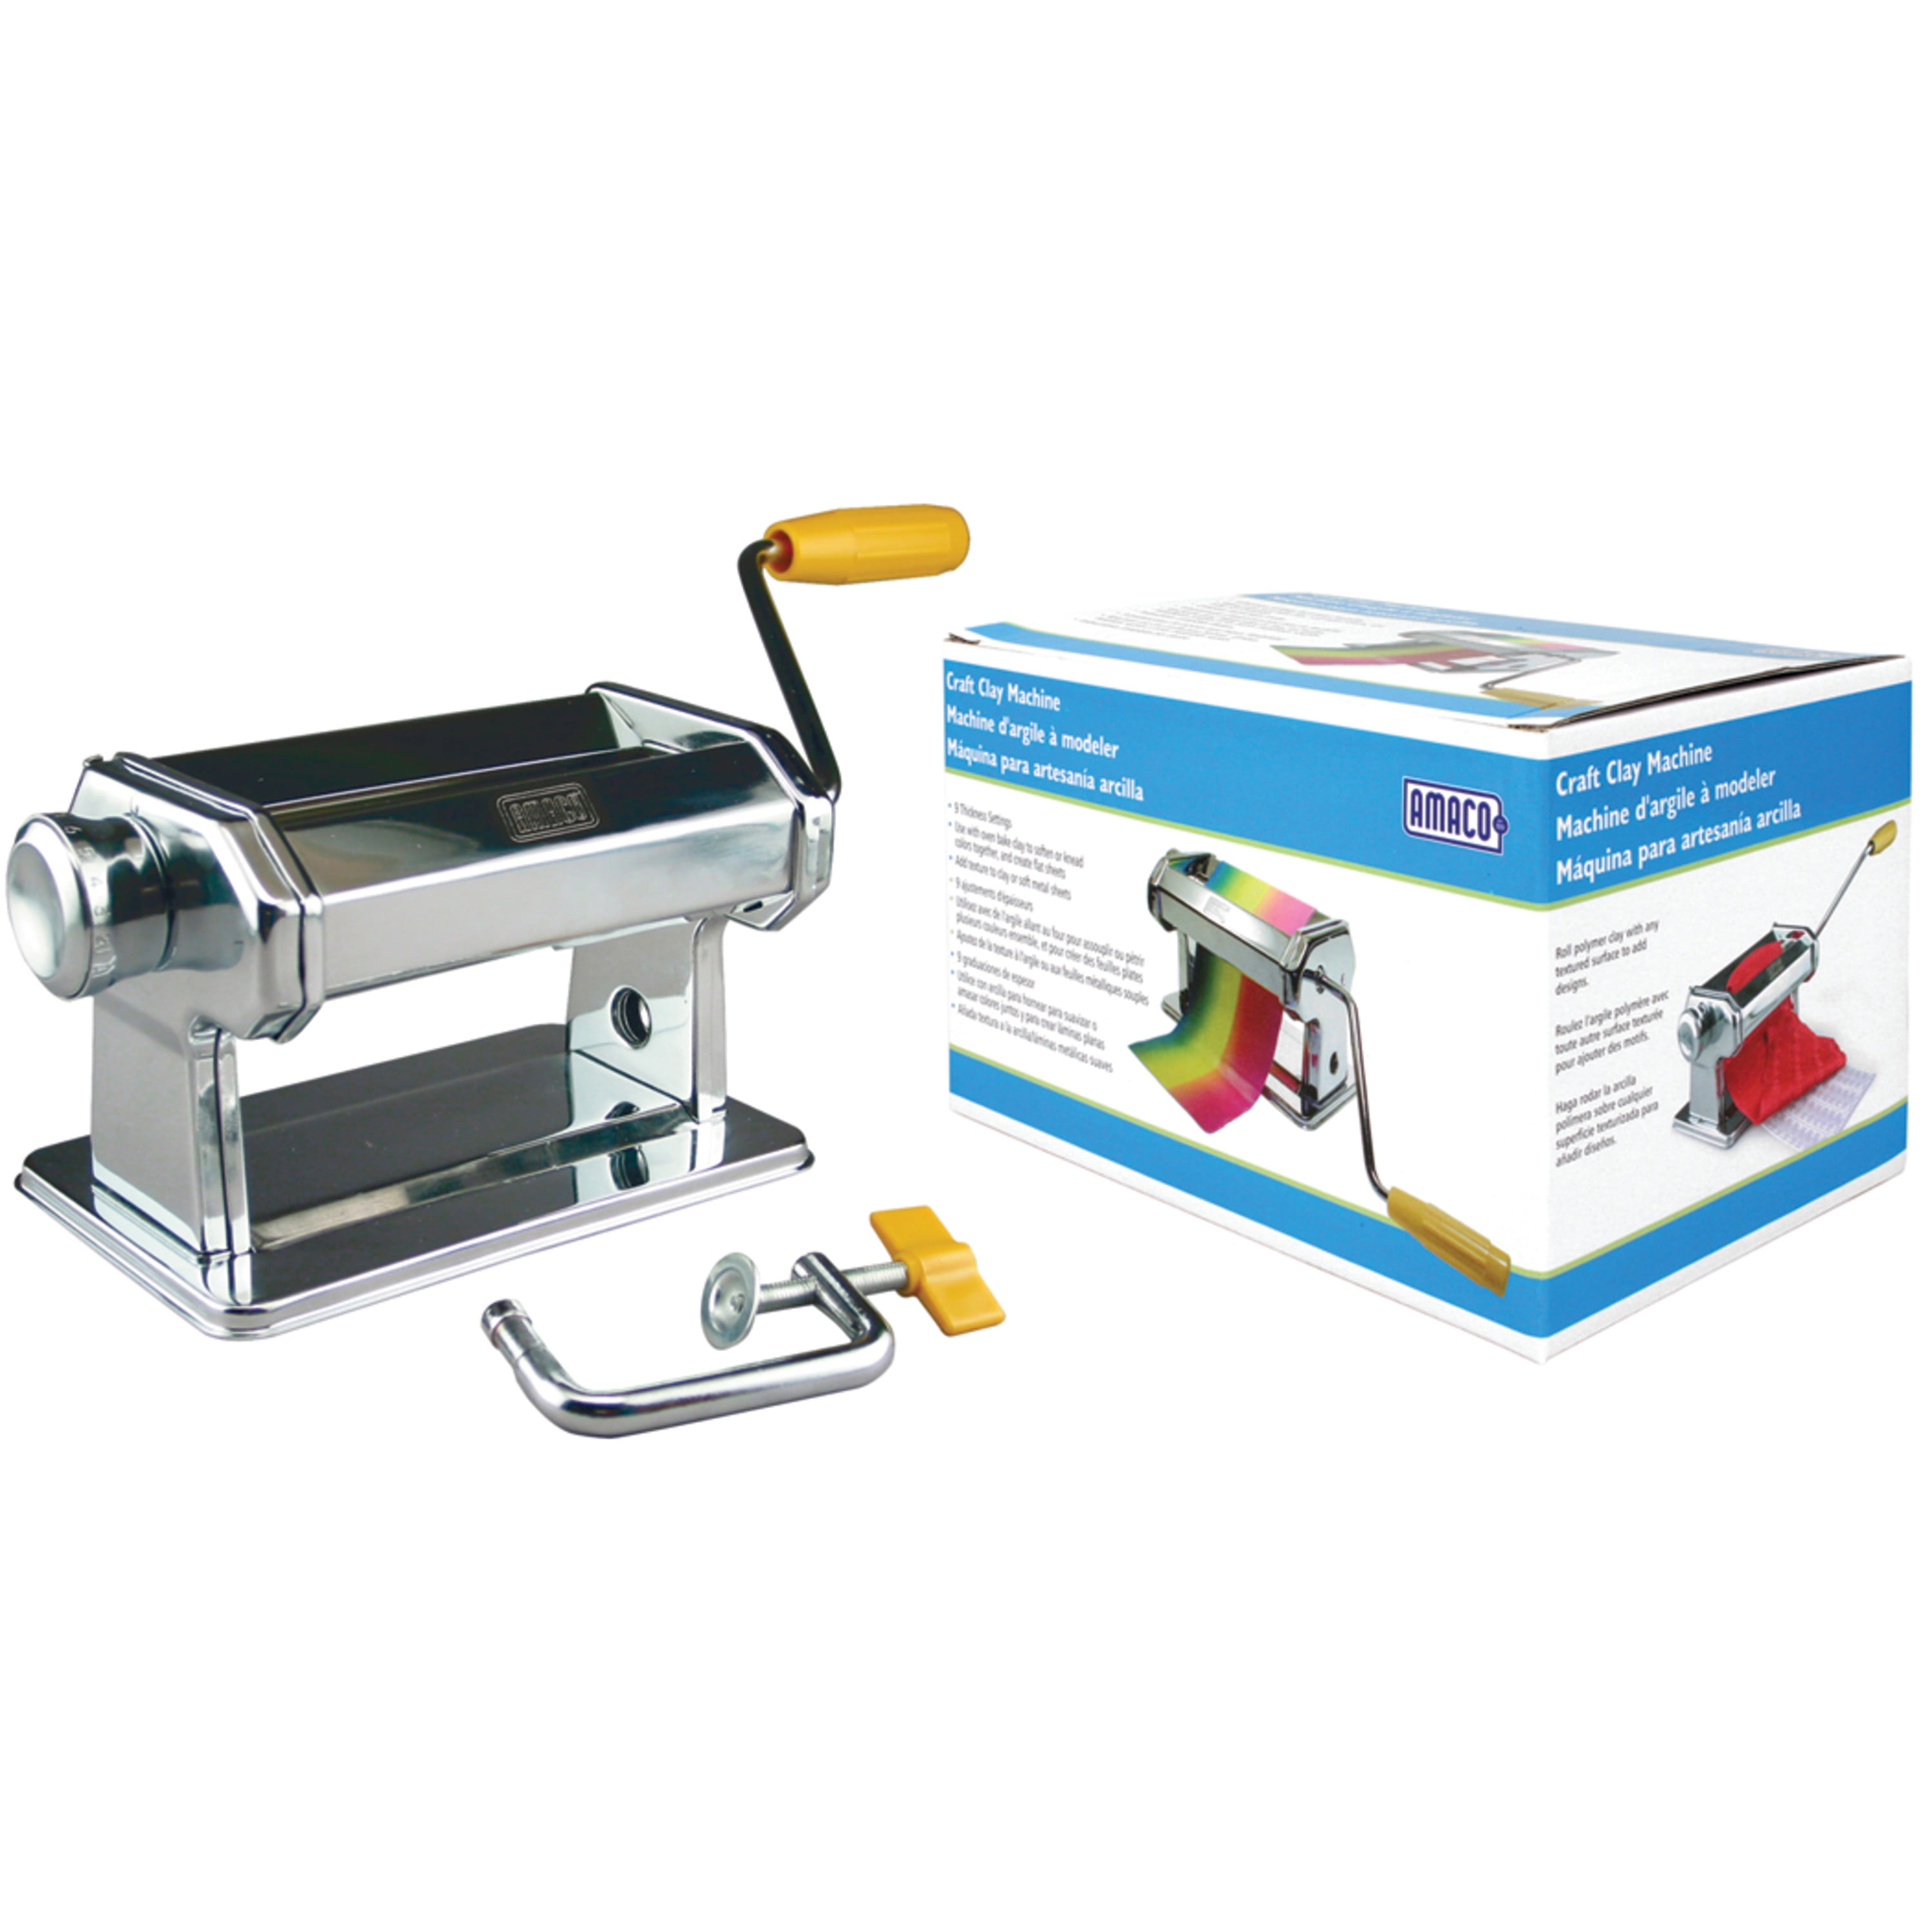 Amaco Pasta Machine to Use With Polymer Clays and Soft Metal Sheets Model  12381S 